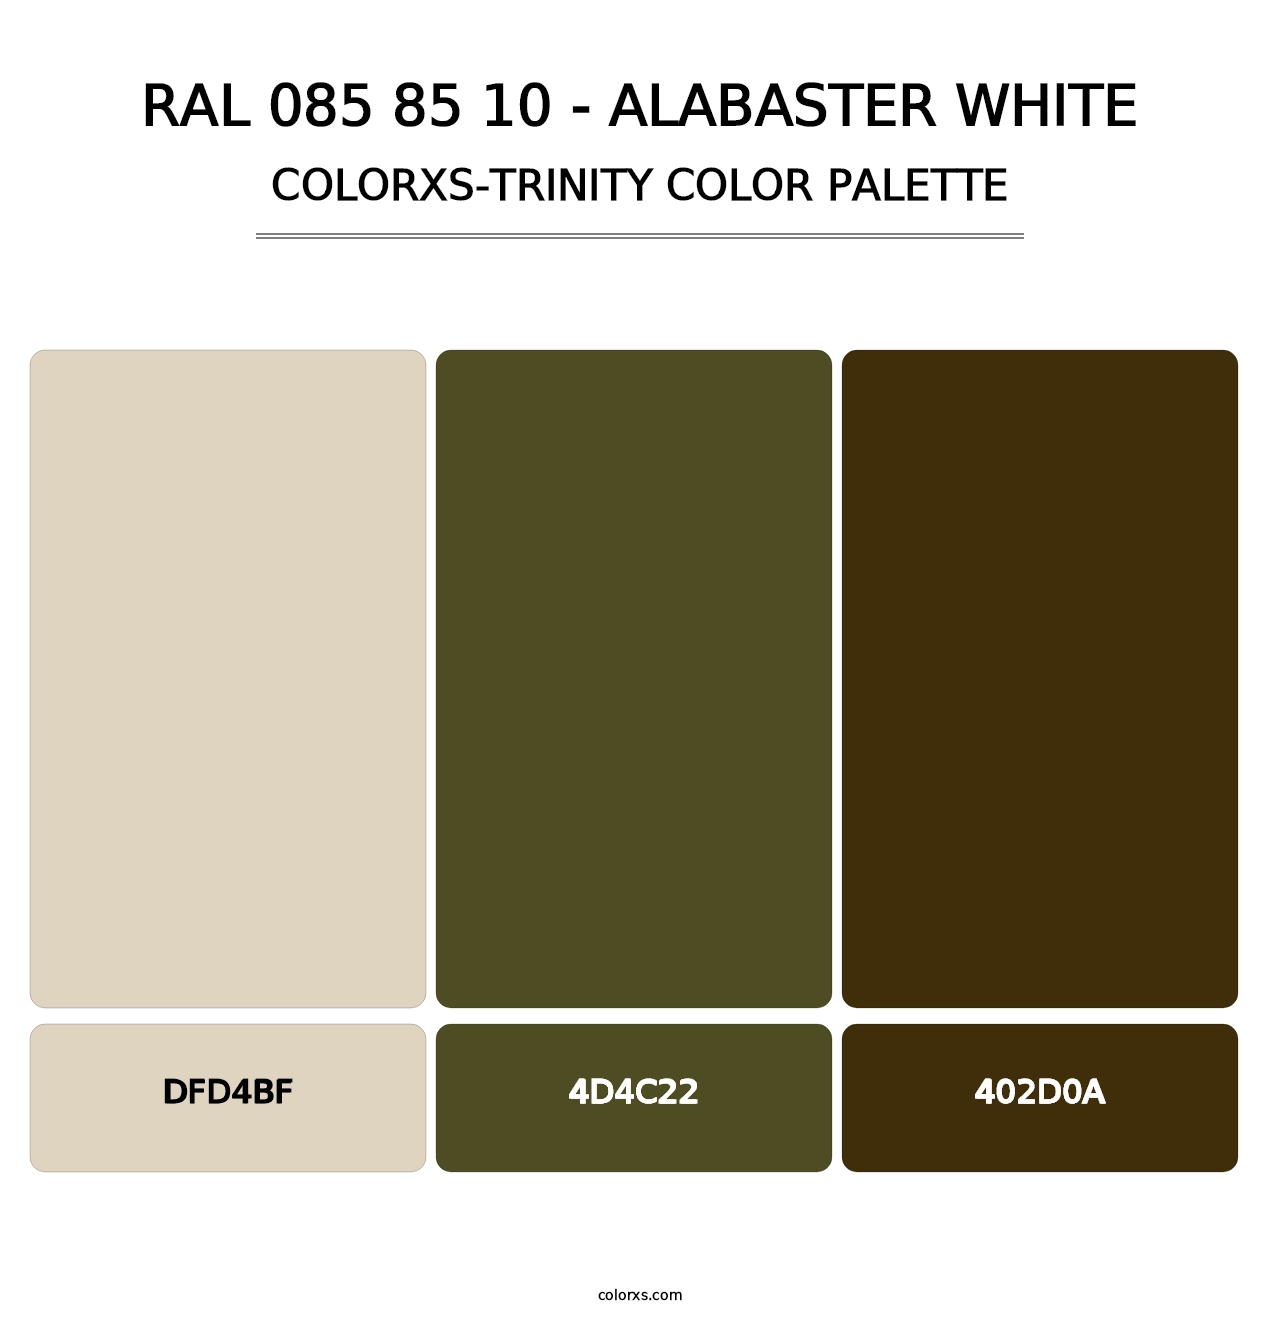 RAL 085 85 10 - Alabaster White - Colorxs Trinity Palette